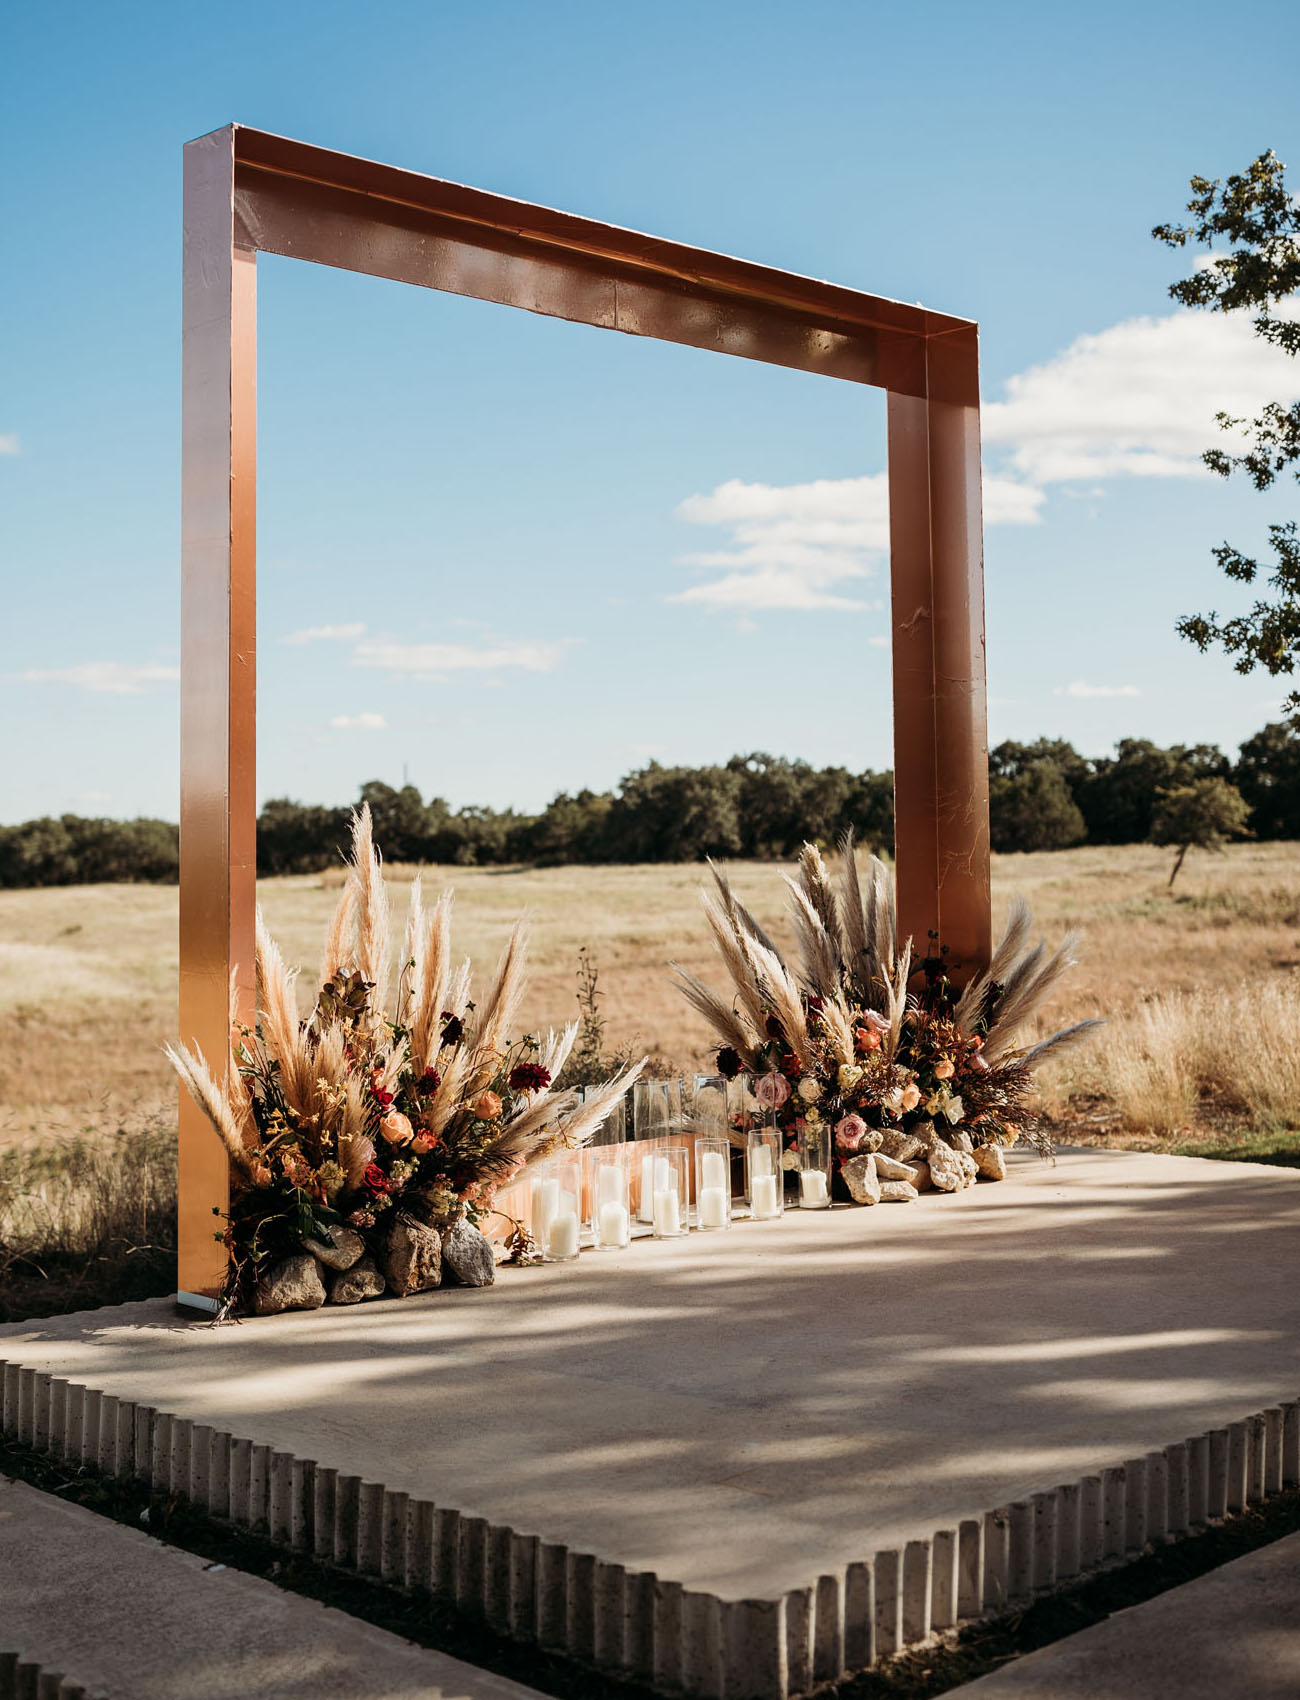 The wedding arch was a copper one, with lush florals, pampas grass and pillar candles